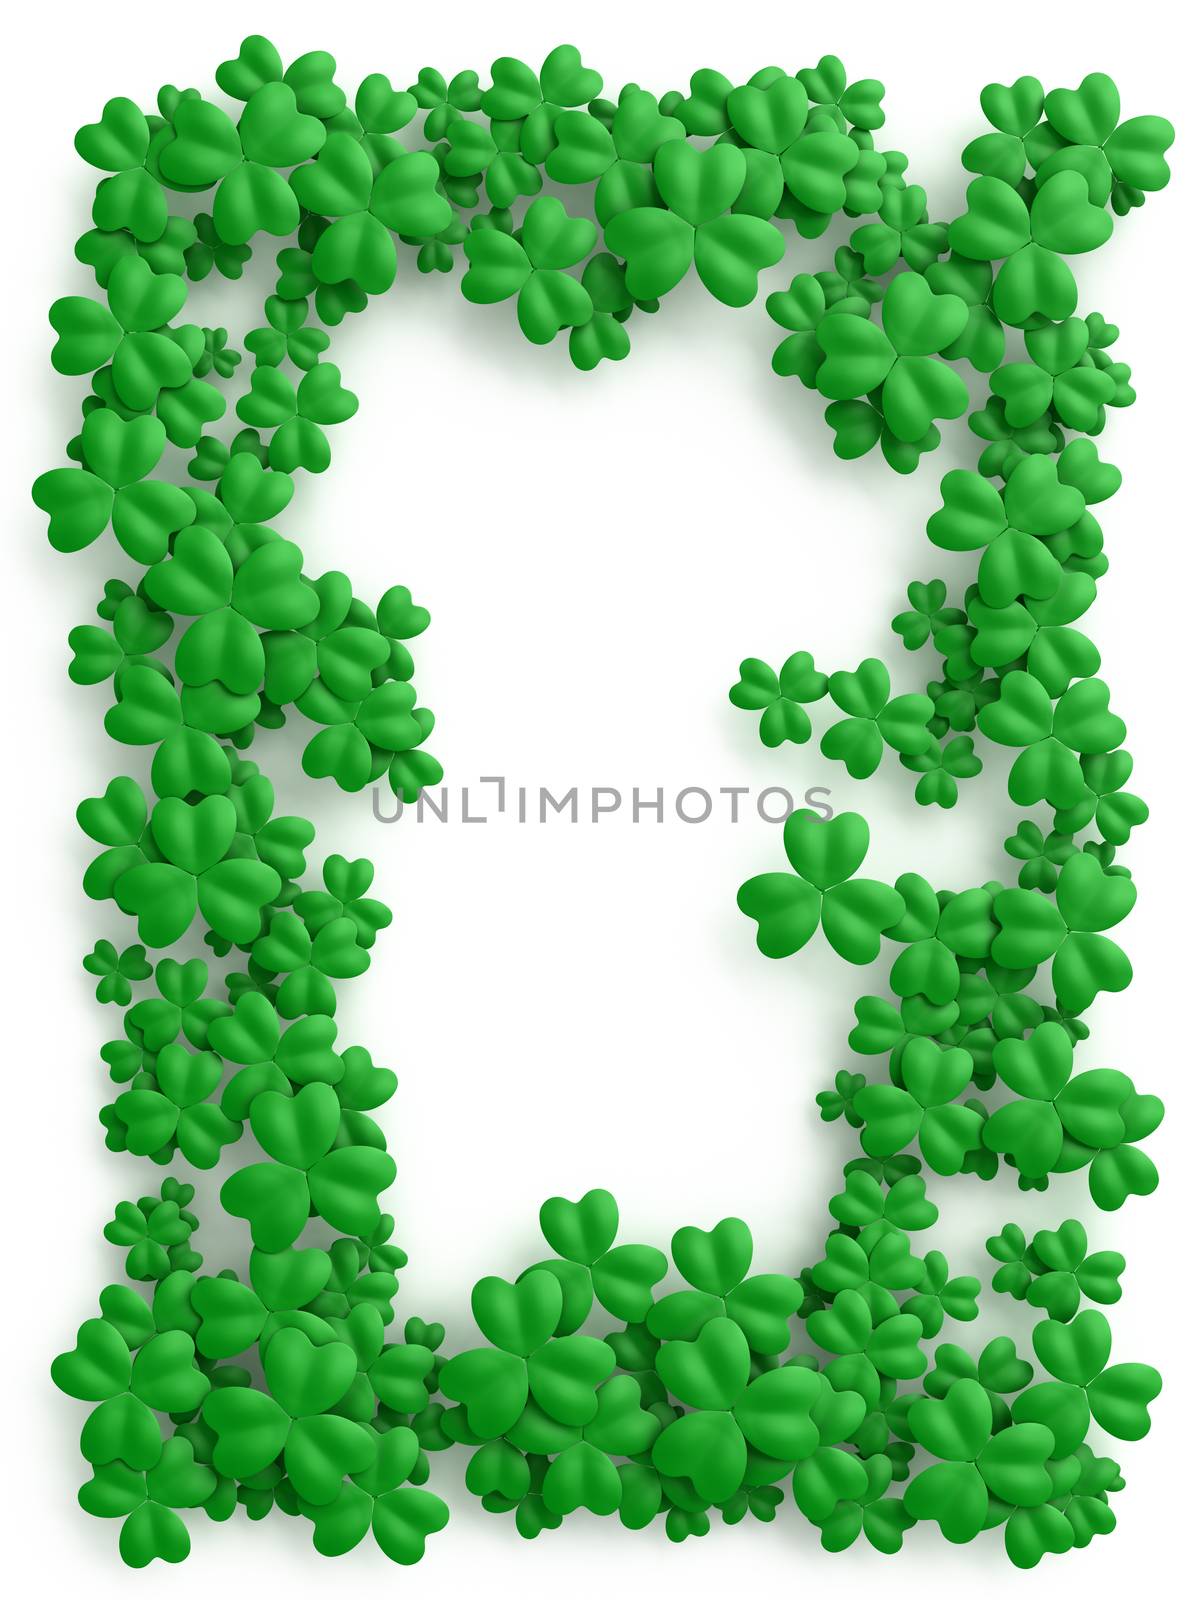 Clover background for St. Patrick Day by don_vladimir